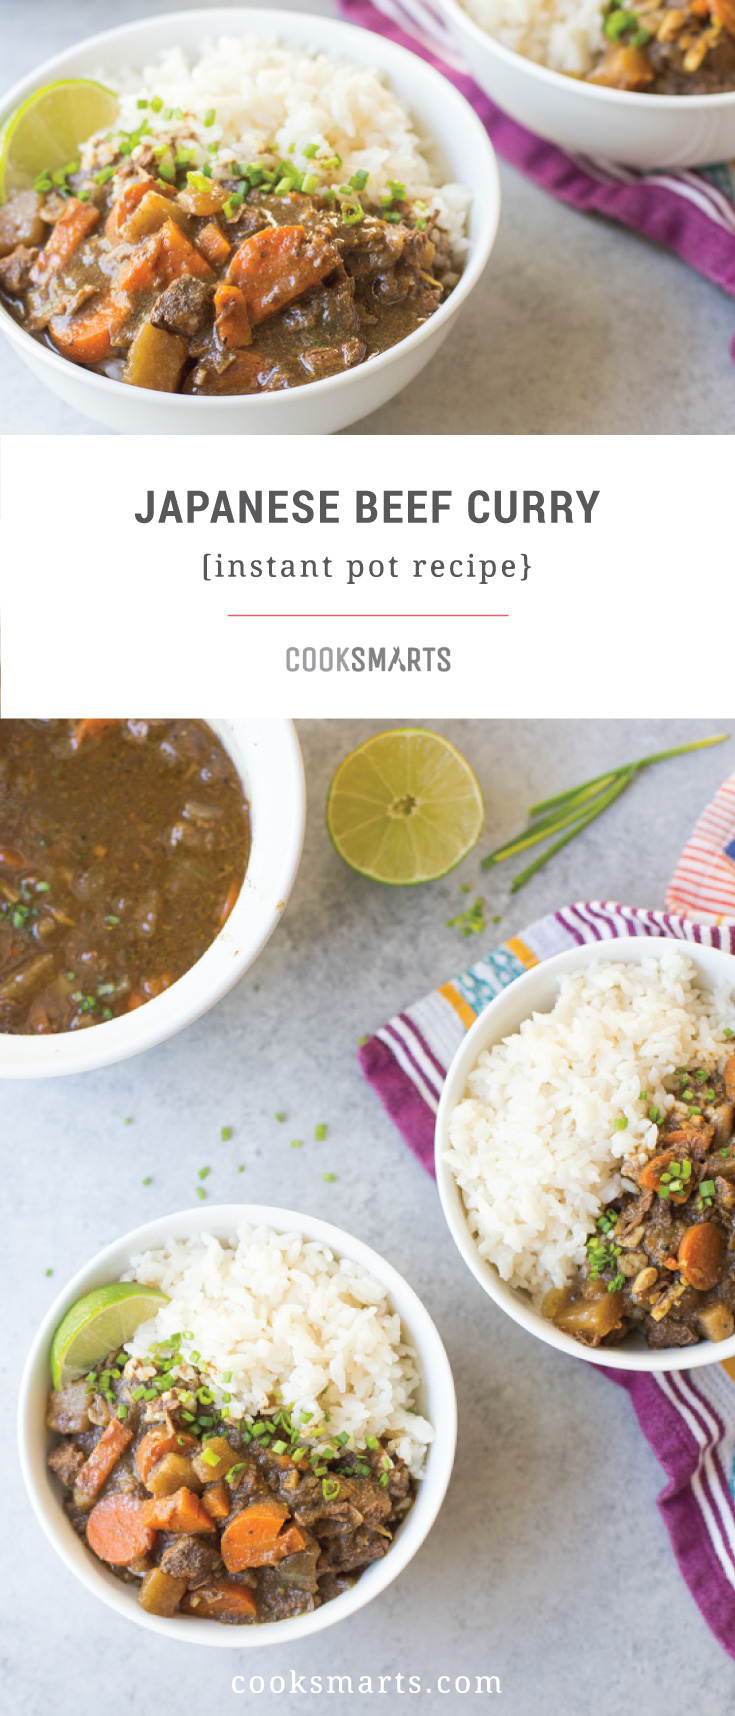 Instant Pot Japanese Curry Recipe | Cook Smarts